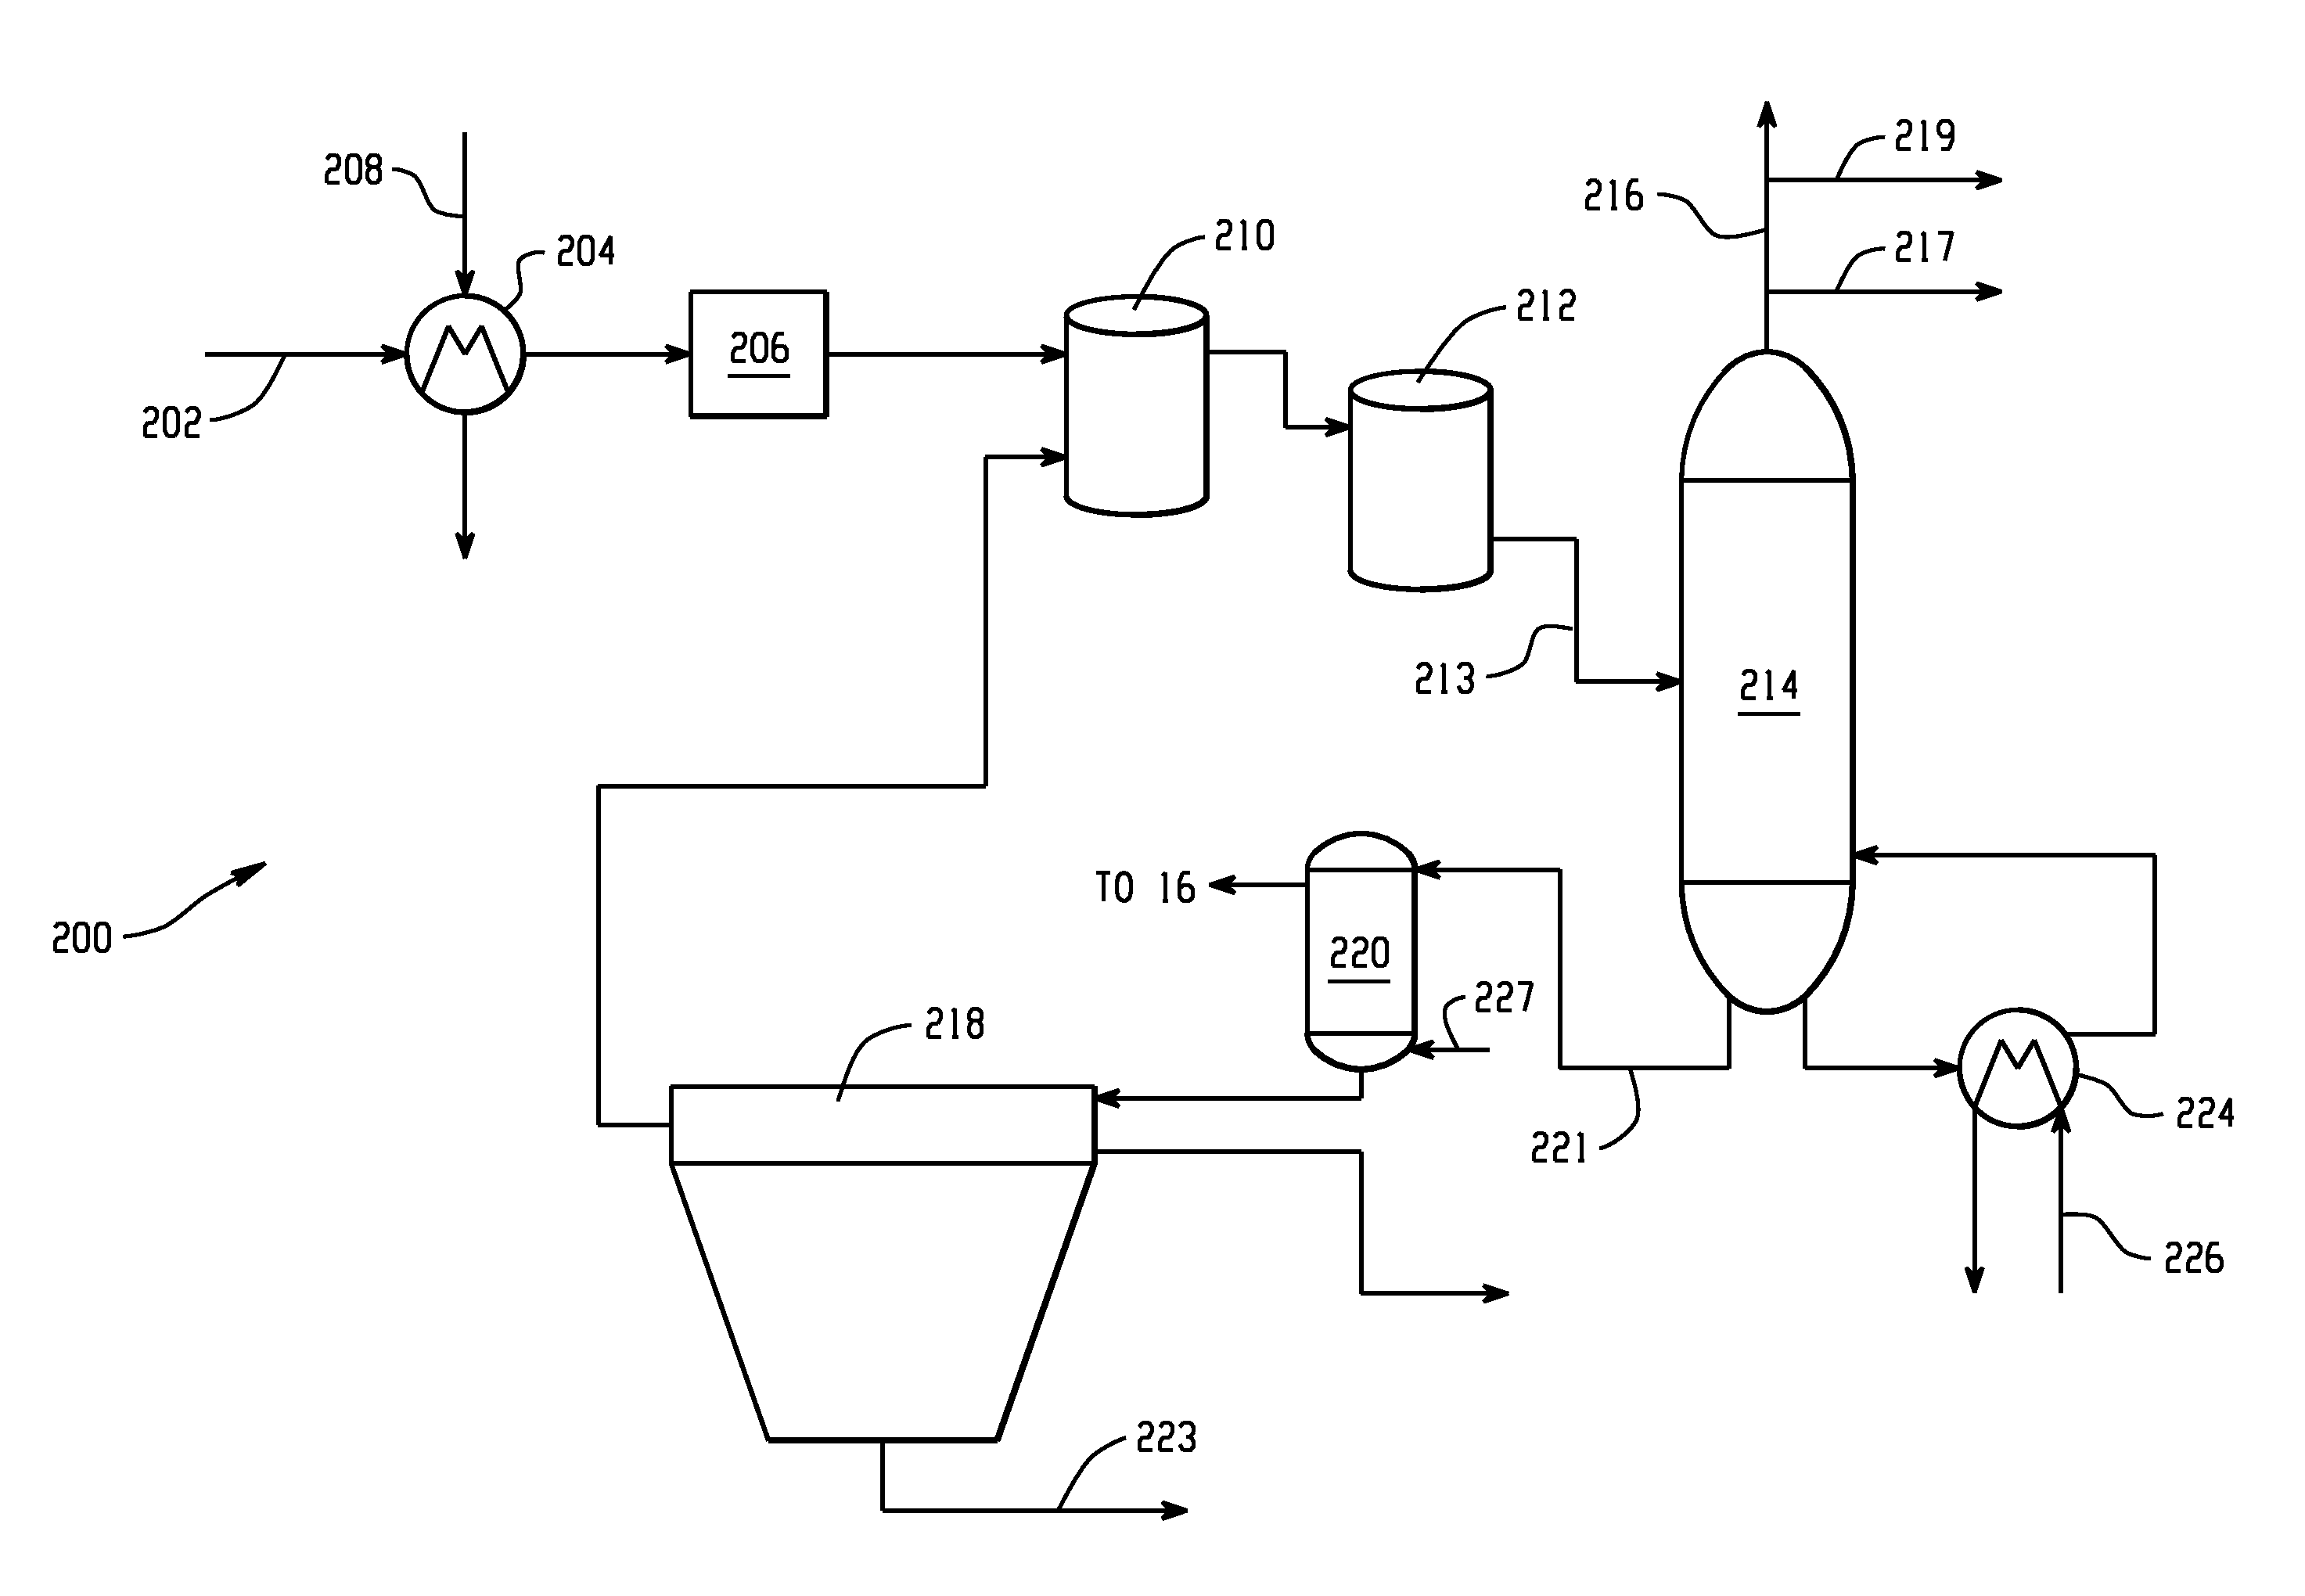 Chilled ammonia based co2 capture system with ammonia recovery and processes of use